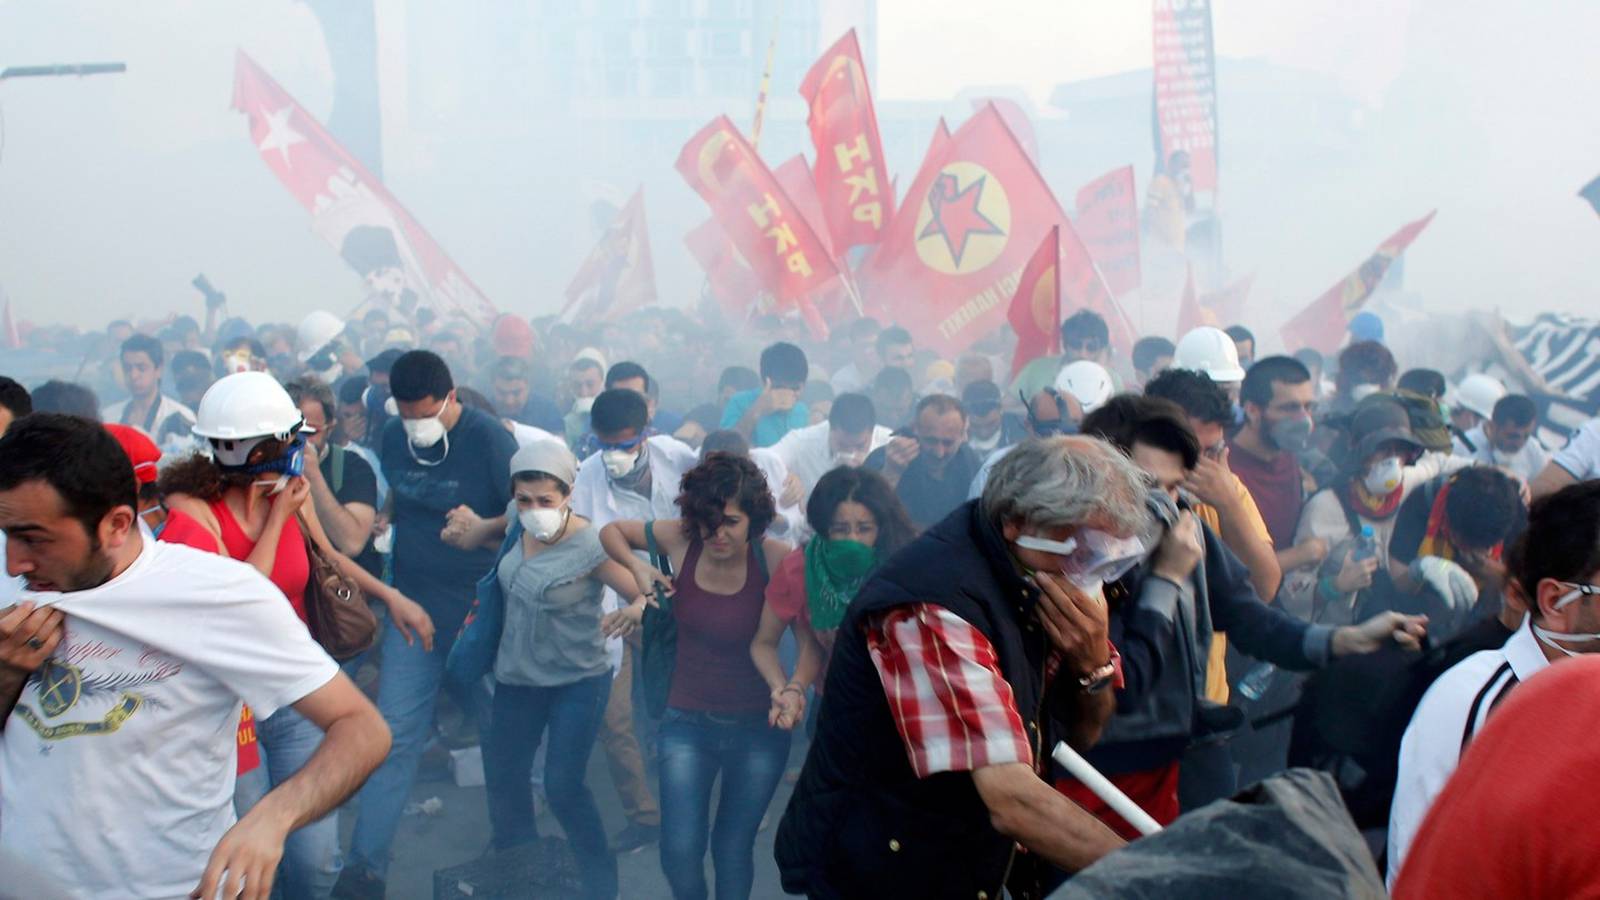 Turkish Police Use Tear Gas And Water Cannon Against Protesters The Irish Times 